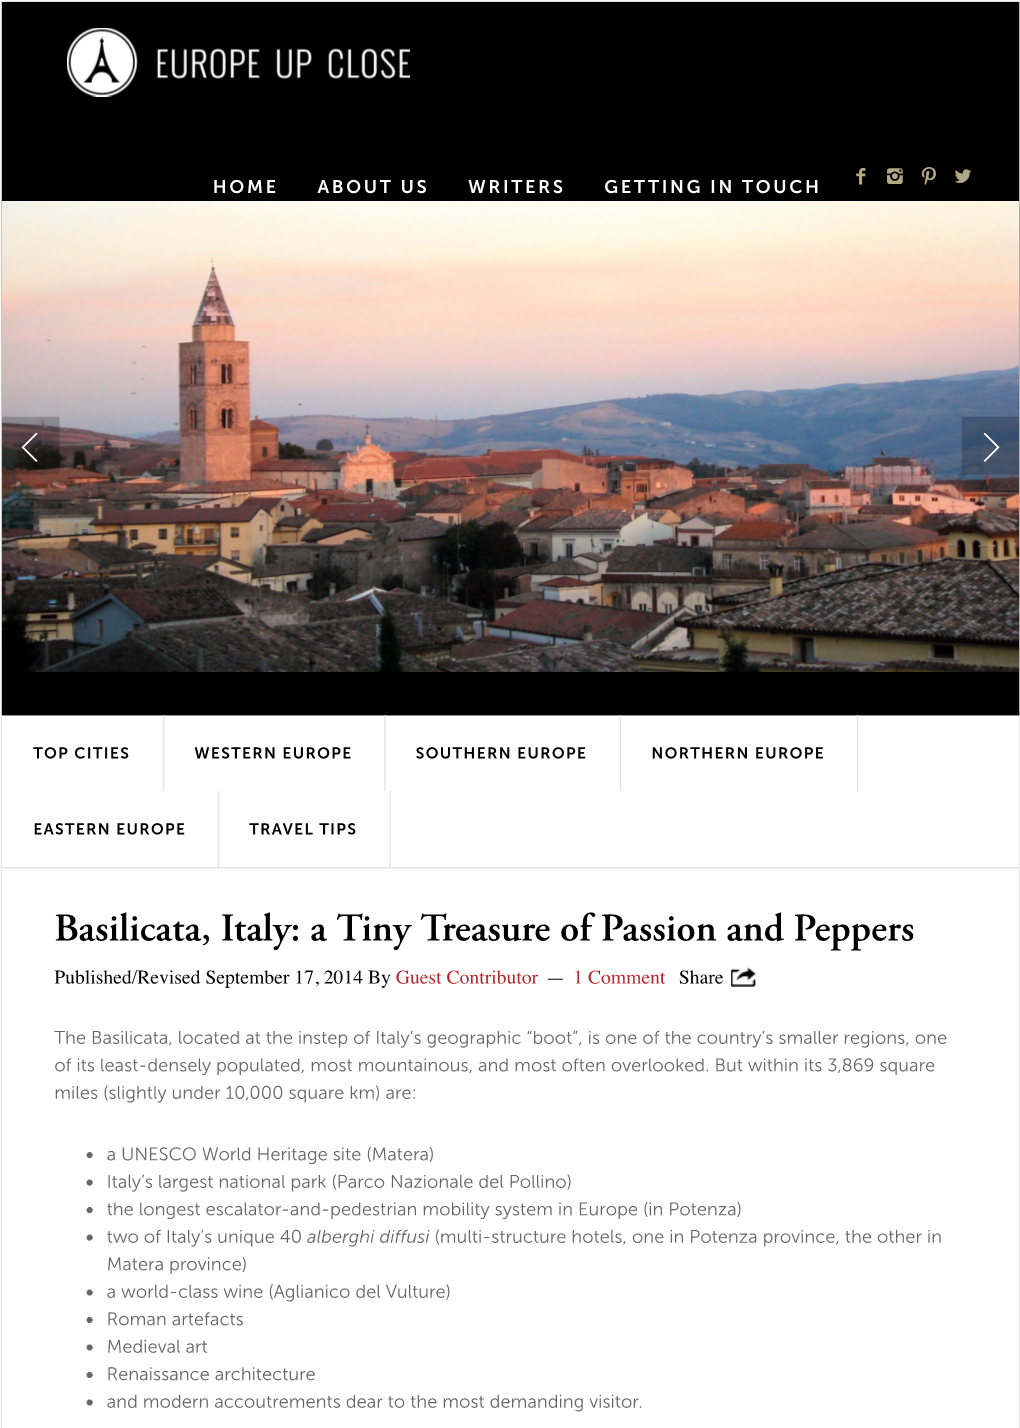 Basilicata, Italy: a Tiny Treasure of Passion and Peppers Published/Revised September 17, 2014 by Guest Contributor — 1 Comment Share